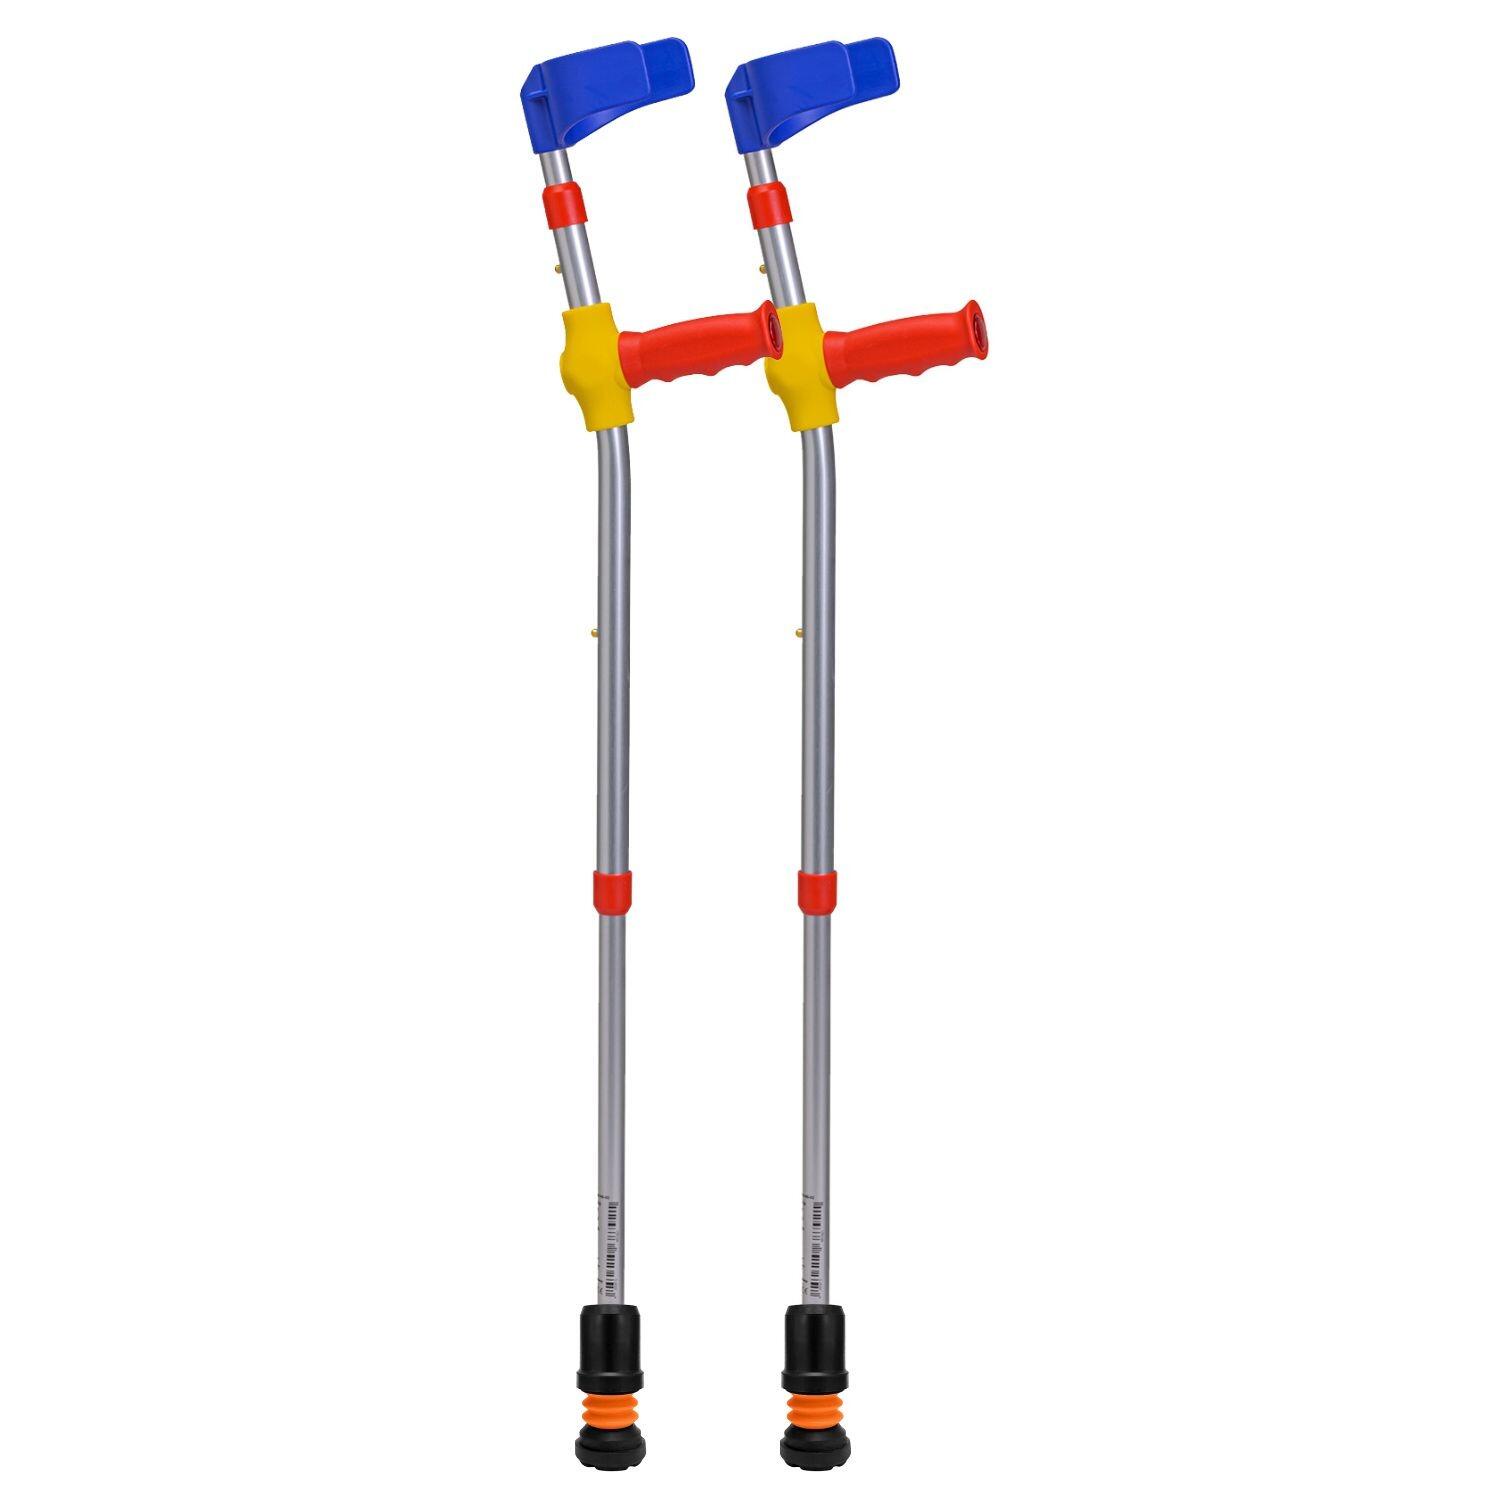 Flexyfoot Soft Grip Double Adjustable Kids Crutches - Red Handle - Full Crutches